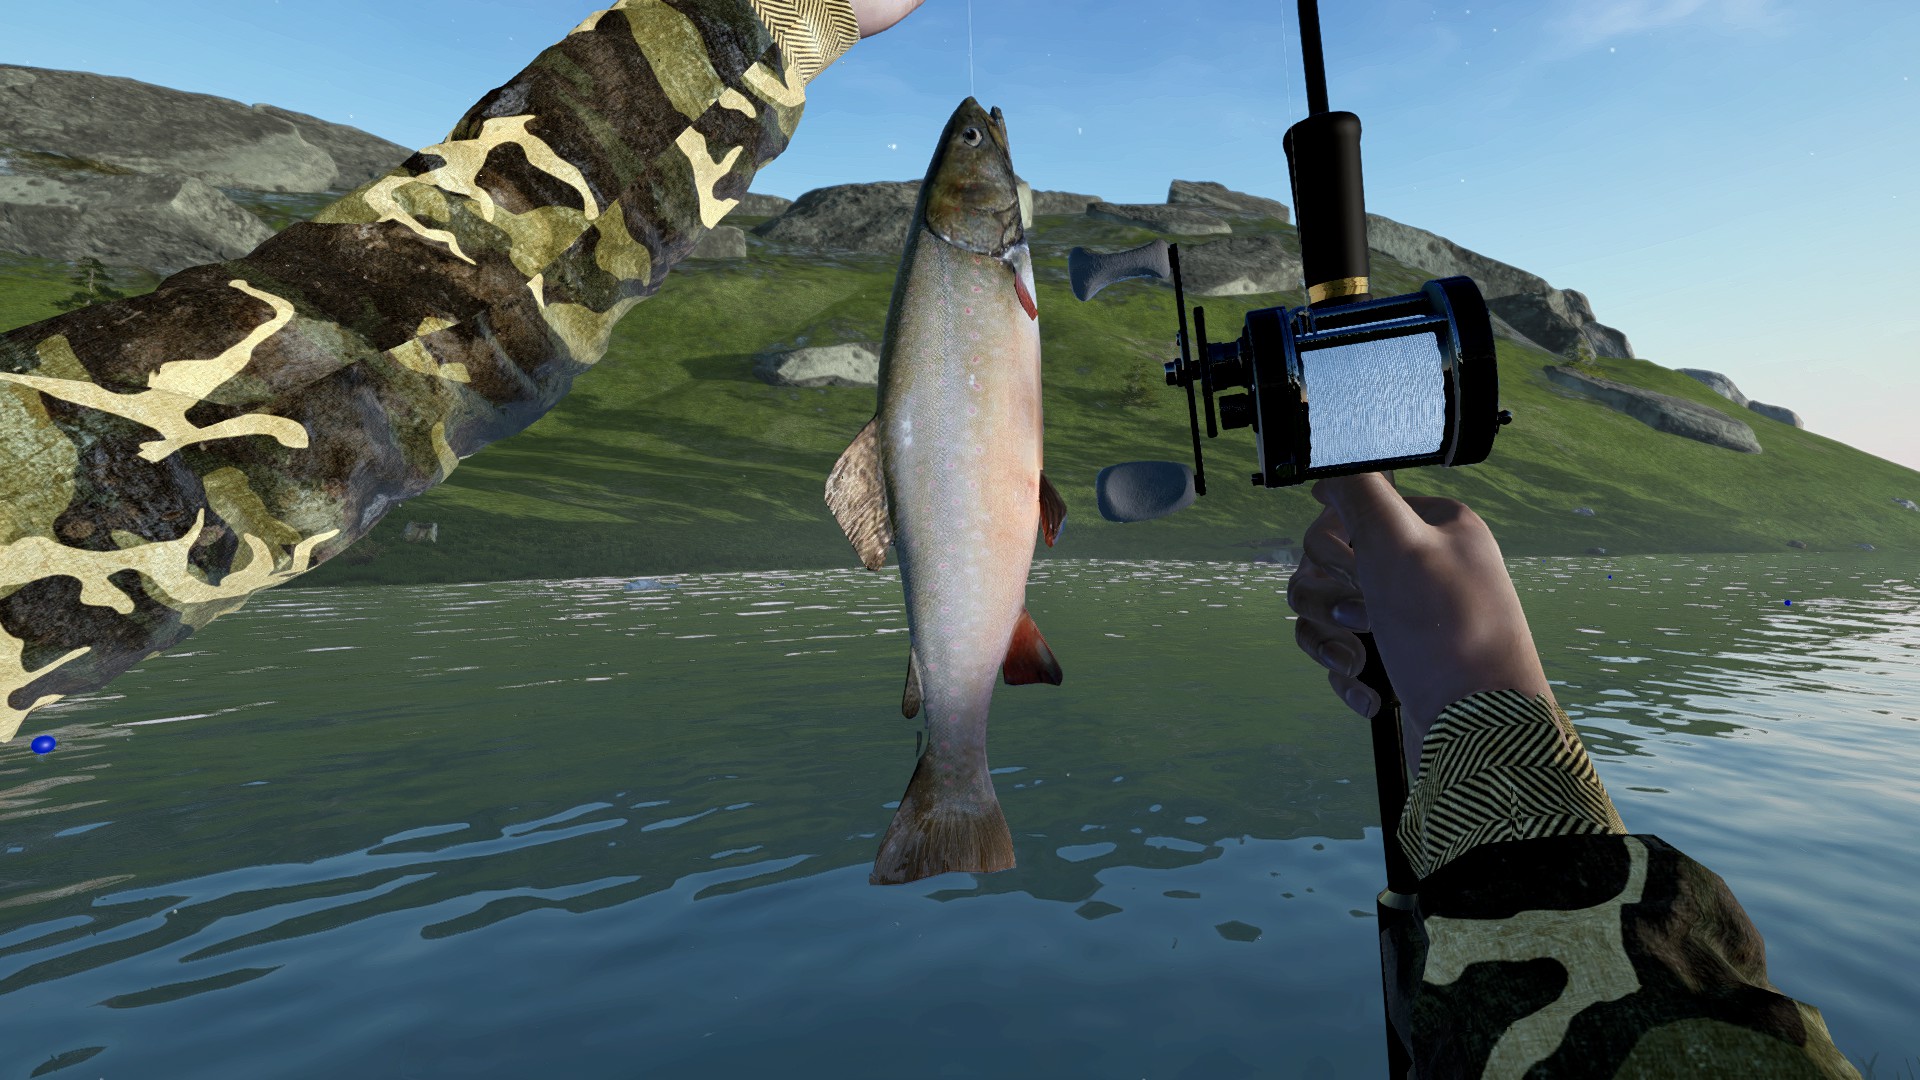 fishing game download free for pc